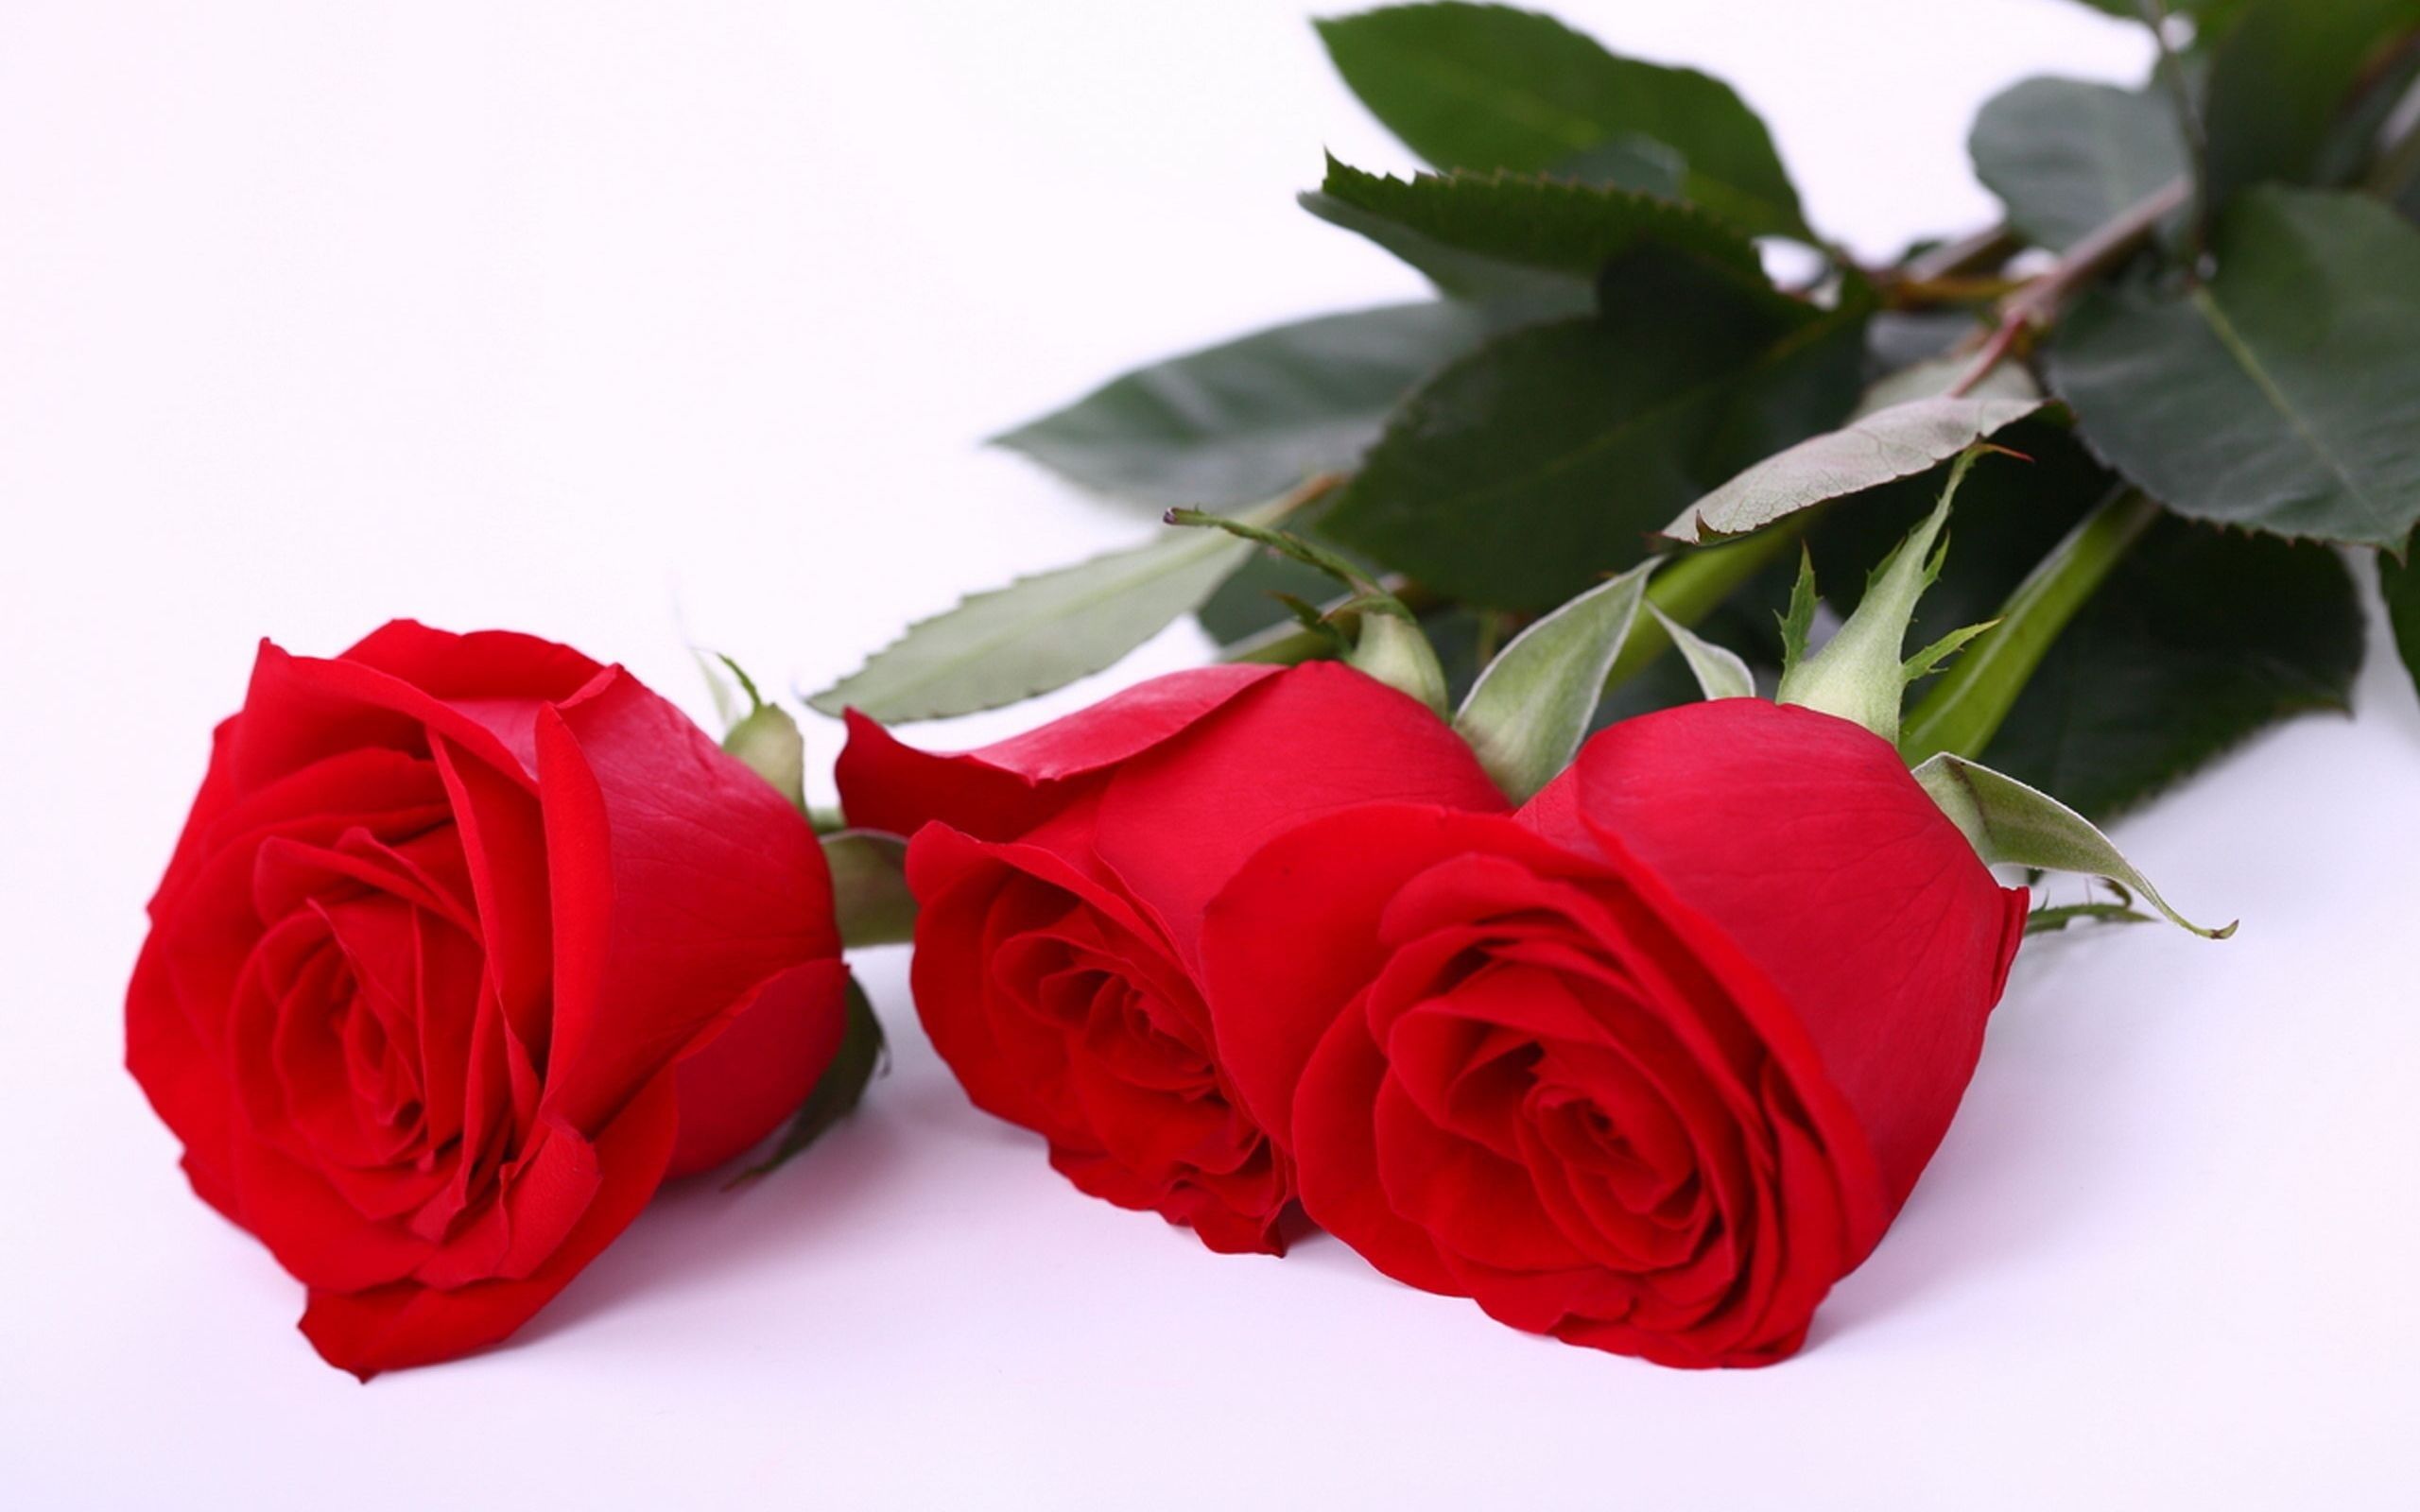 Red Rose HD Wallpaper, Red Rose Photos, New Wallpapers